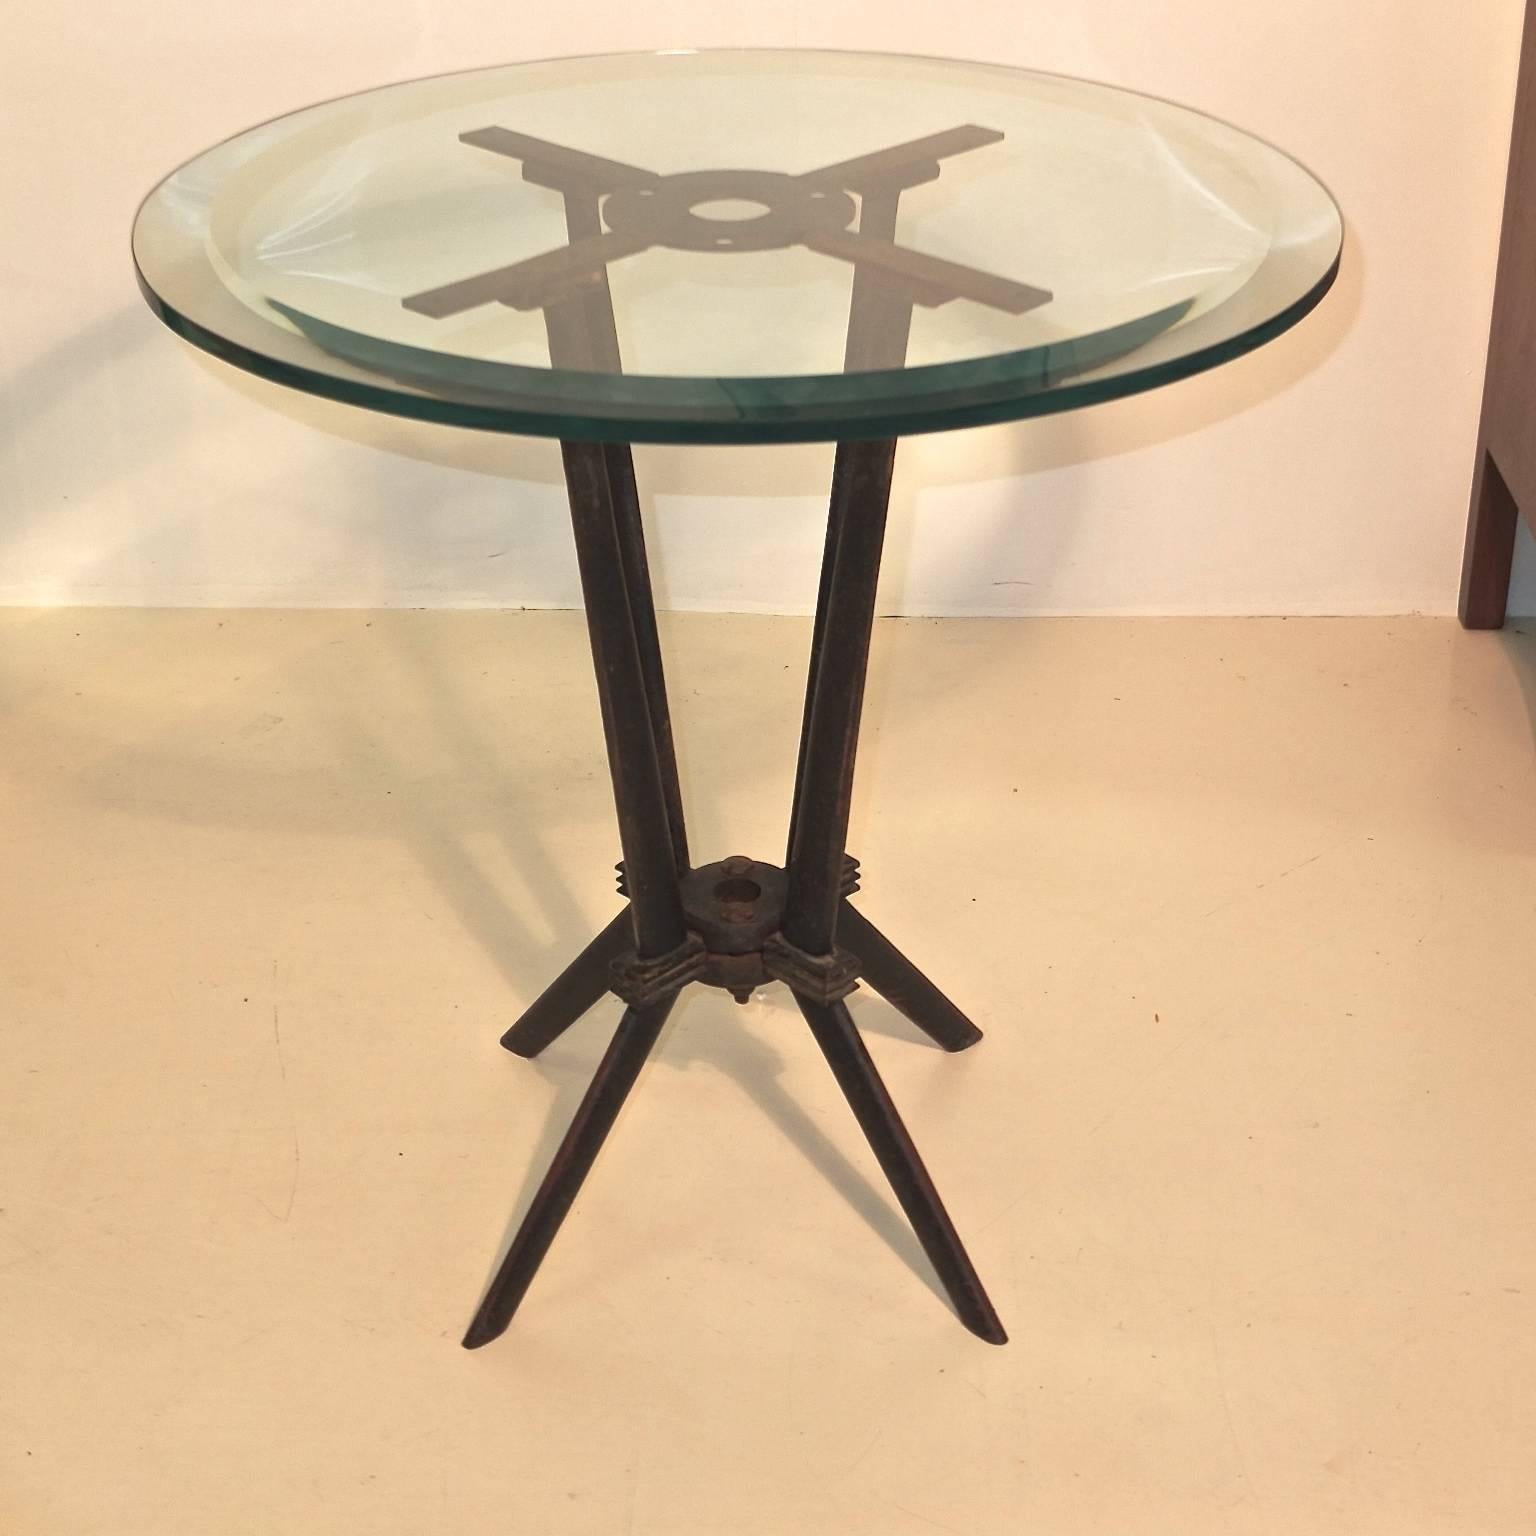 French 1930s bistro table base shown with a 28